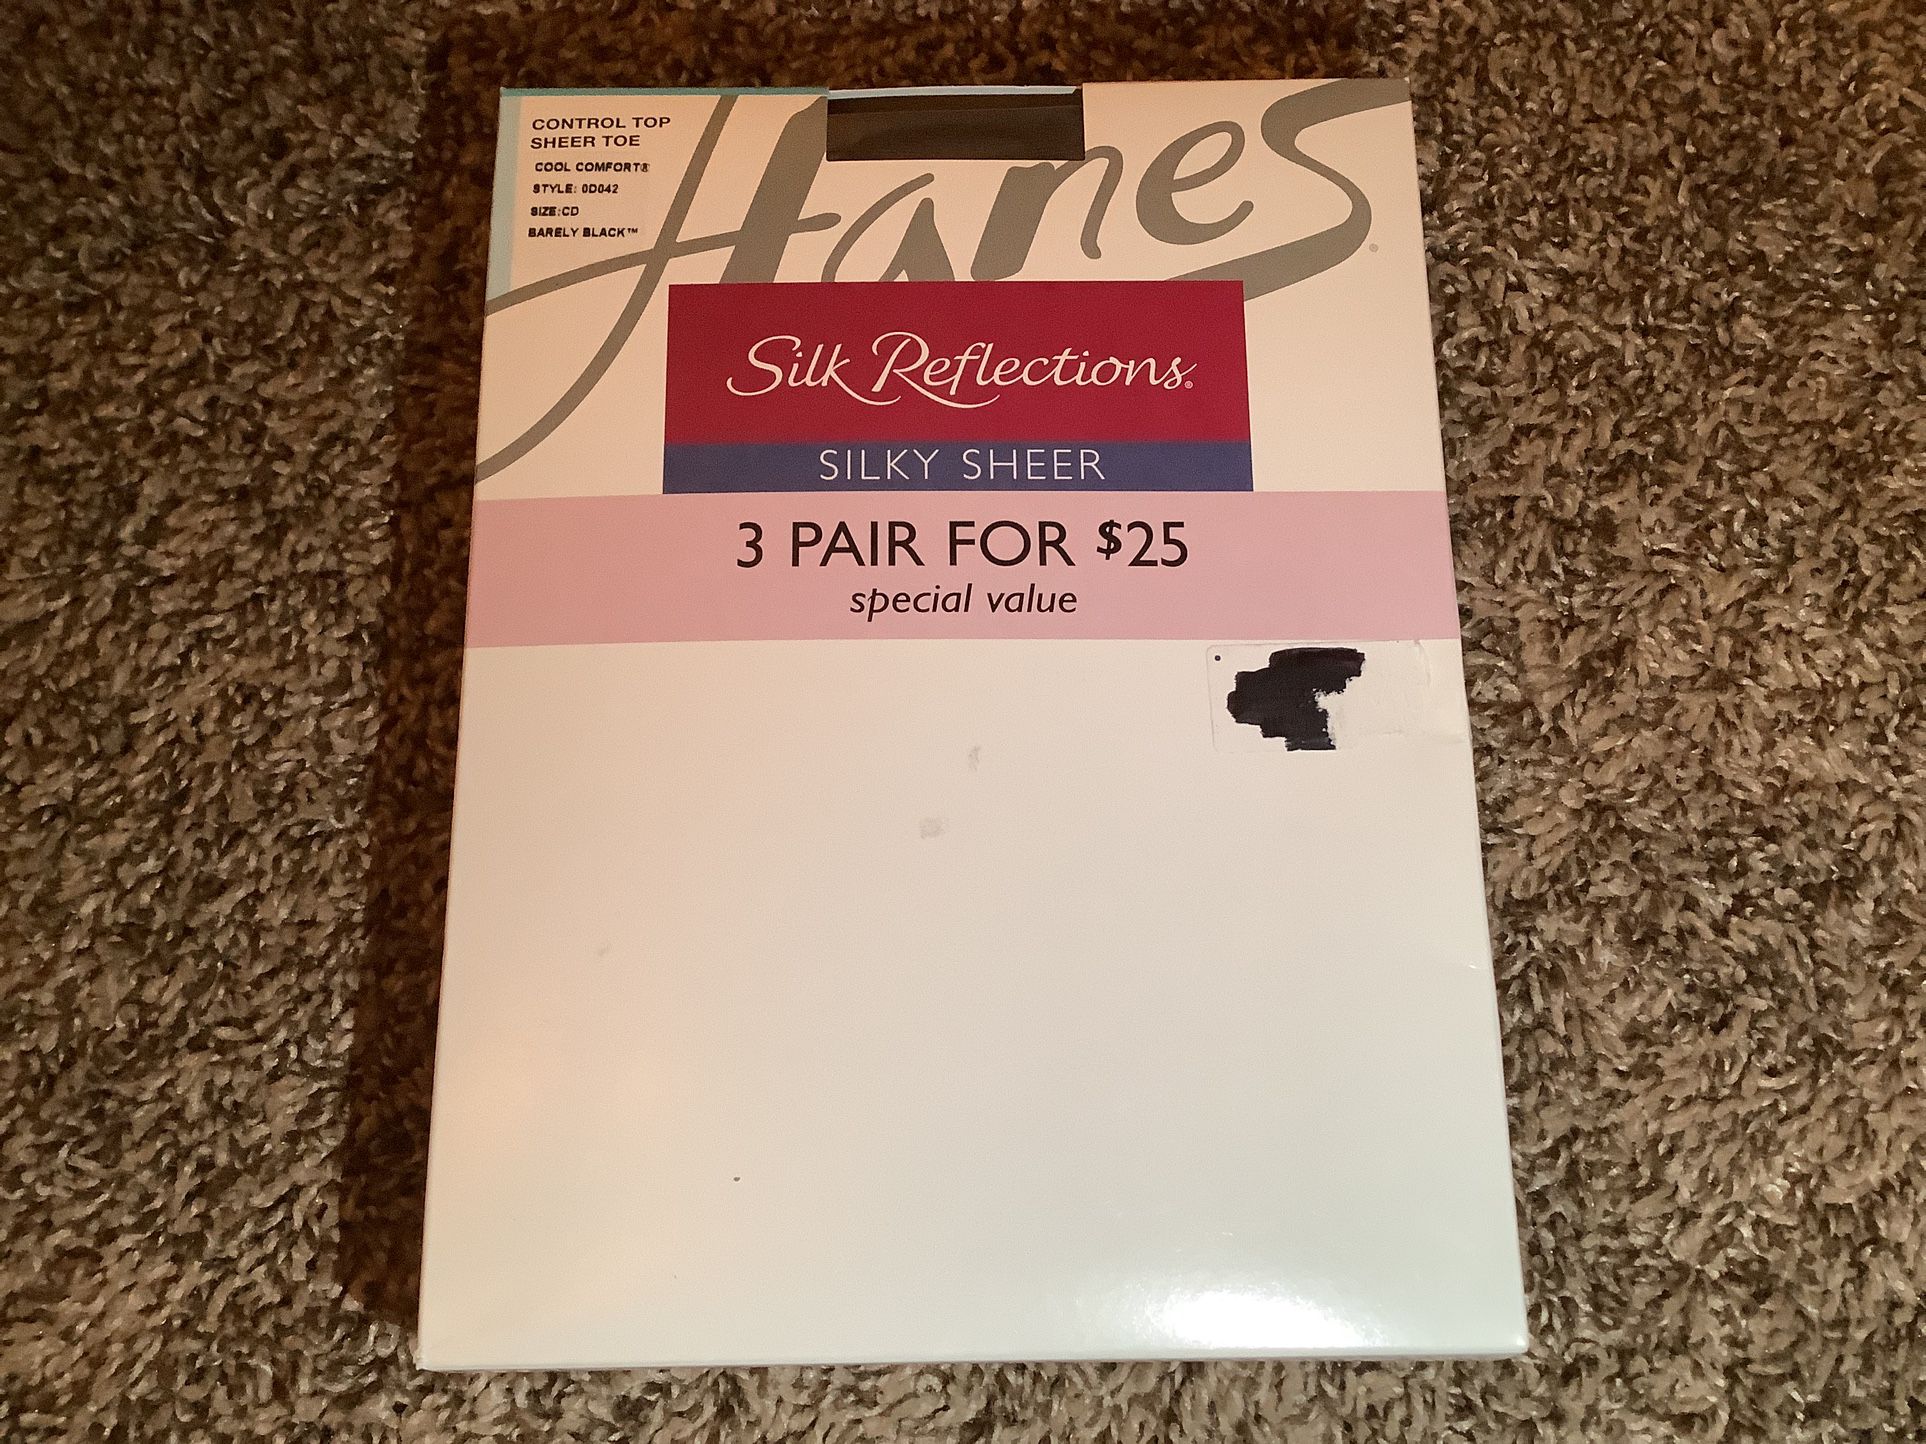 3 pairs - Hanes silk reflections control top pantyhose, barely black, size: CD